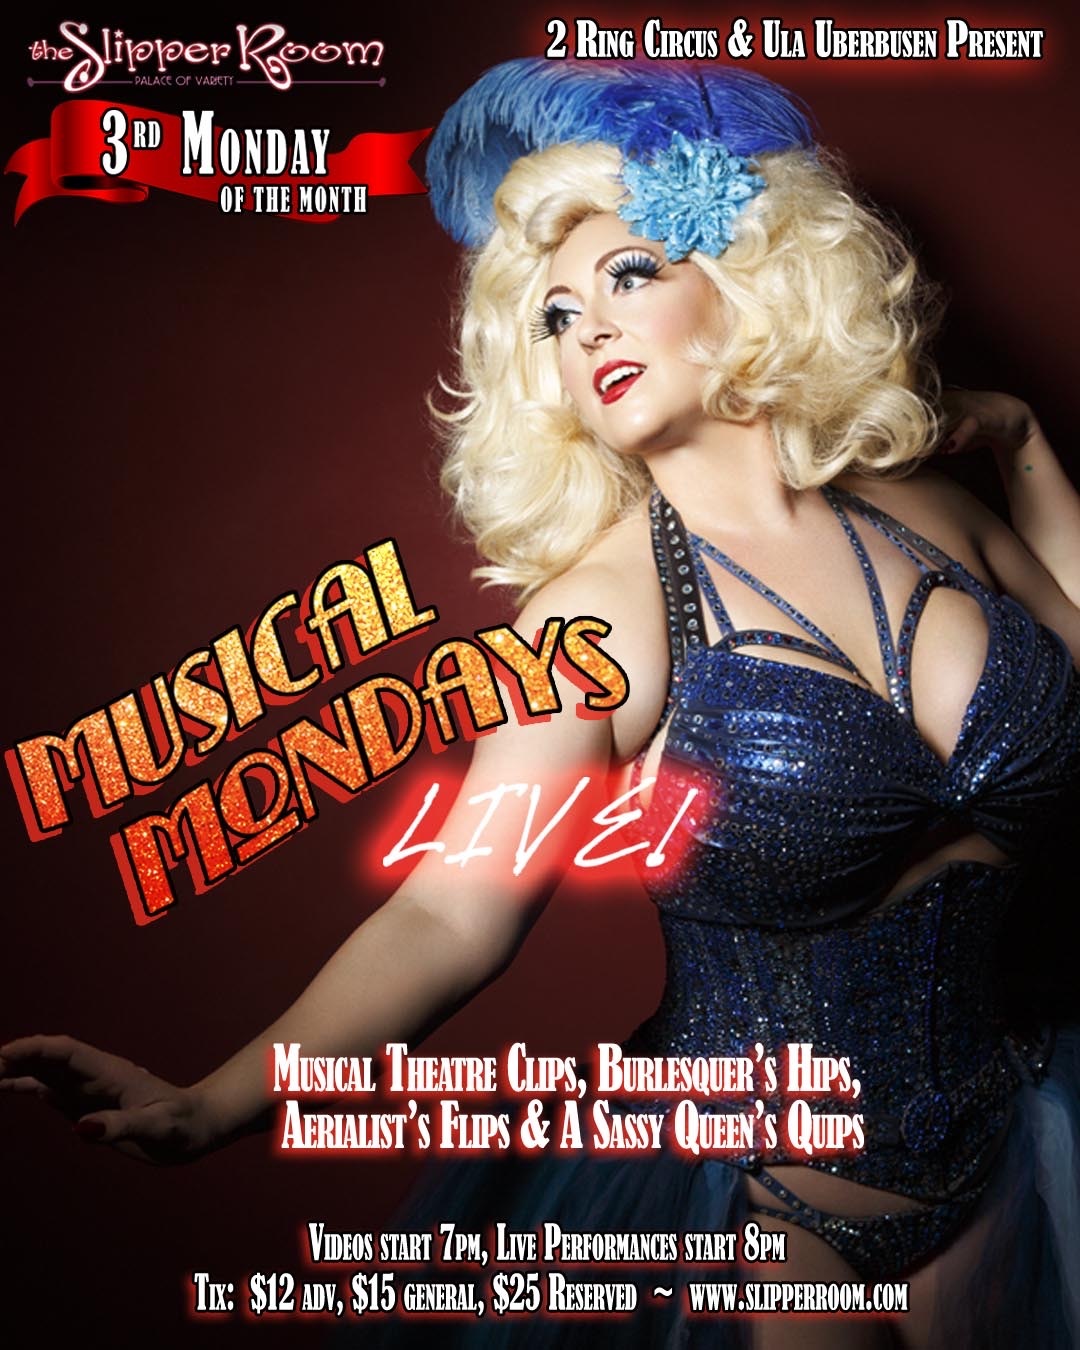 Featuring absolute knockout, Ula Uberbusen! ?????? Doors 7pm/Show 8pm. ?Musical Theatre Clips, Burlesquer?s Hips, Aerialist?s Flips, & A Sassy Queen?s Quips? Discounted advance tickets at ? slipperroomnyc(dot)com ????? #musicalmondayslive is presented by @ulauberbusen & @2ringcircus and continues on the 3rd Monday of the month at the @slipperroomnyc. The February 18 edition features performances by @eve.starr @iambenfranklin @aerialjosh @ulauberbusen @mr.jackbarrow & @_theivoryfox_ ??? #musicalmondays #live #burlesque #boylesque #nycburlesque #cabaret #dragqueen #nycdrag #nycnightlife #burlesqueshow #singalong #broadway #musicaltheatre #showtunes #2ringcircus #nyc #circus #aerial #thingstodonyc #mondaynight #slipperroom #slipperroomnyc #liveentertainment